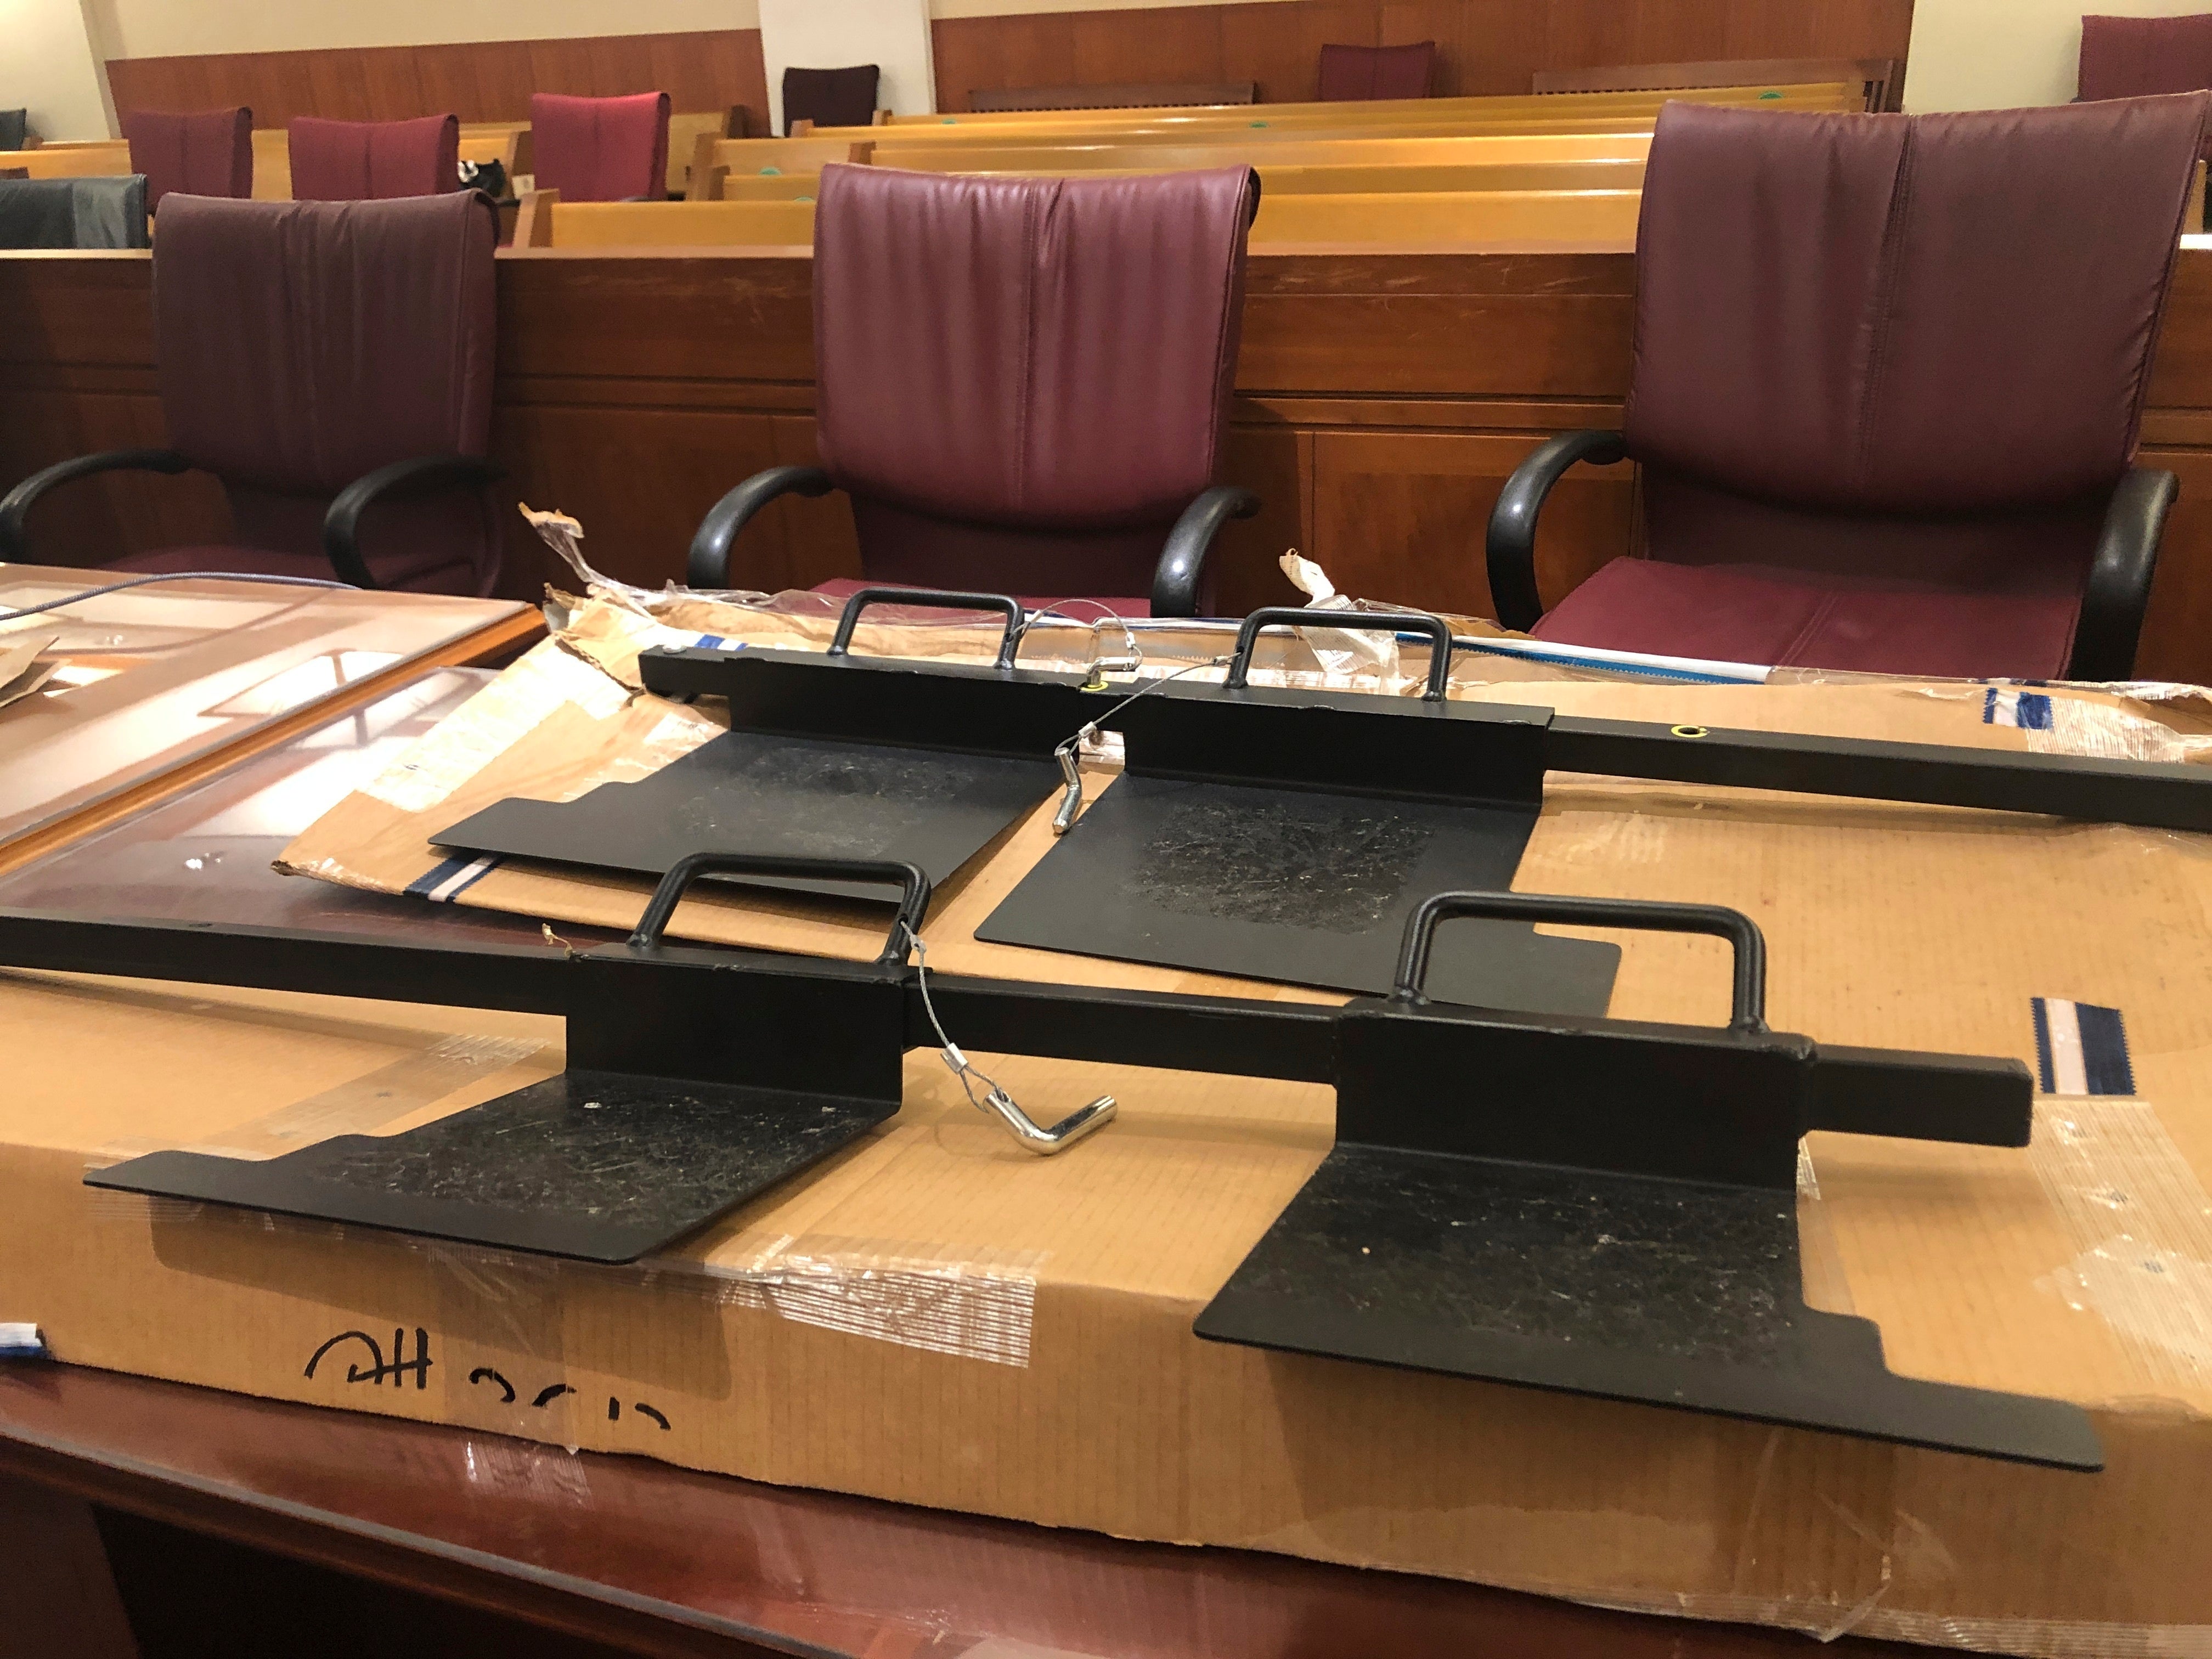 Two devices used as door barricades recovered at the site of the Capital Gazette newspaper during a mass shooting in 2018 are shown in a courtroom Tuesday, June 29, 2021 in Annapolis, Md.